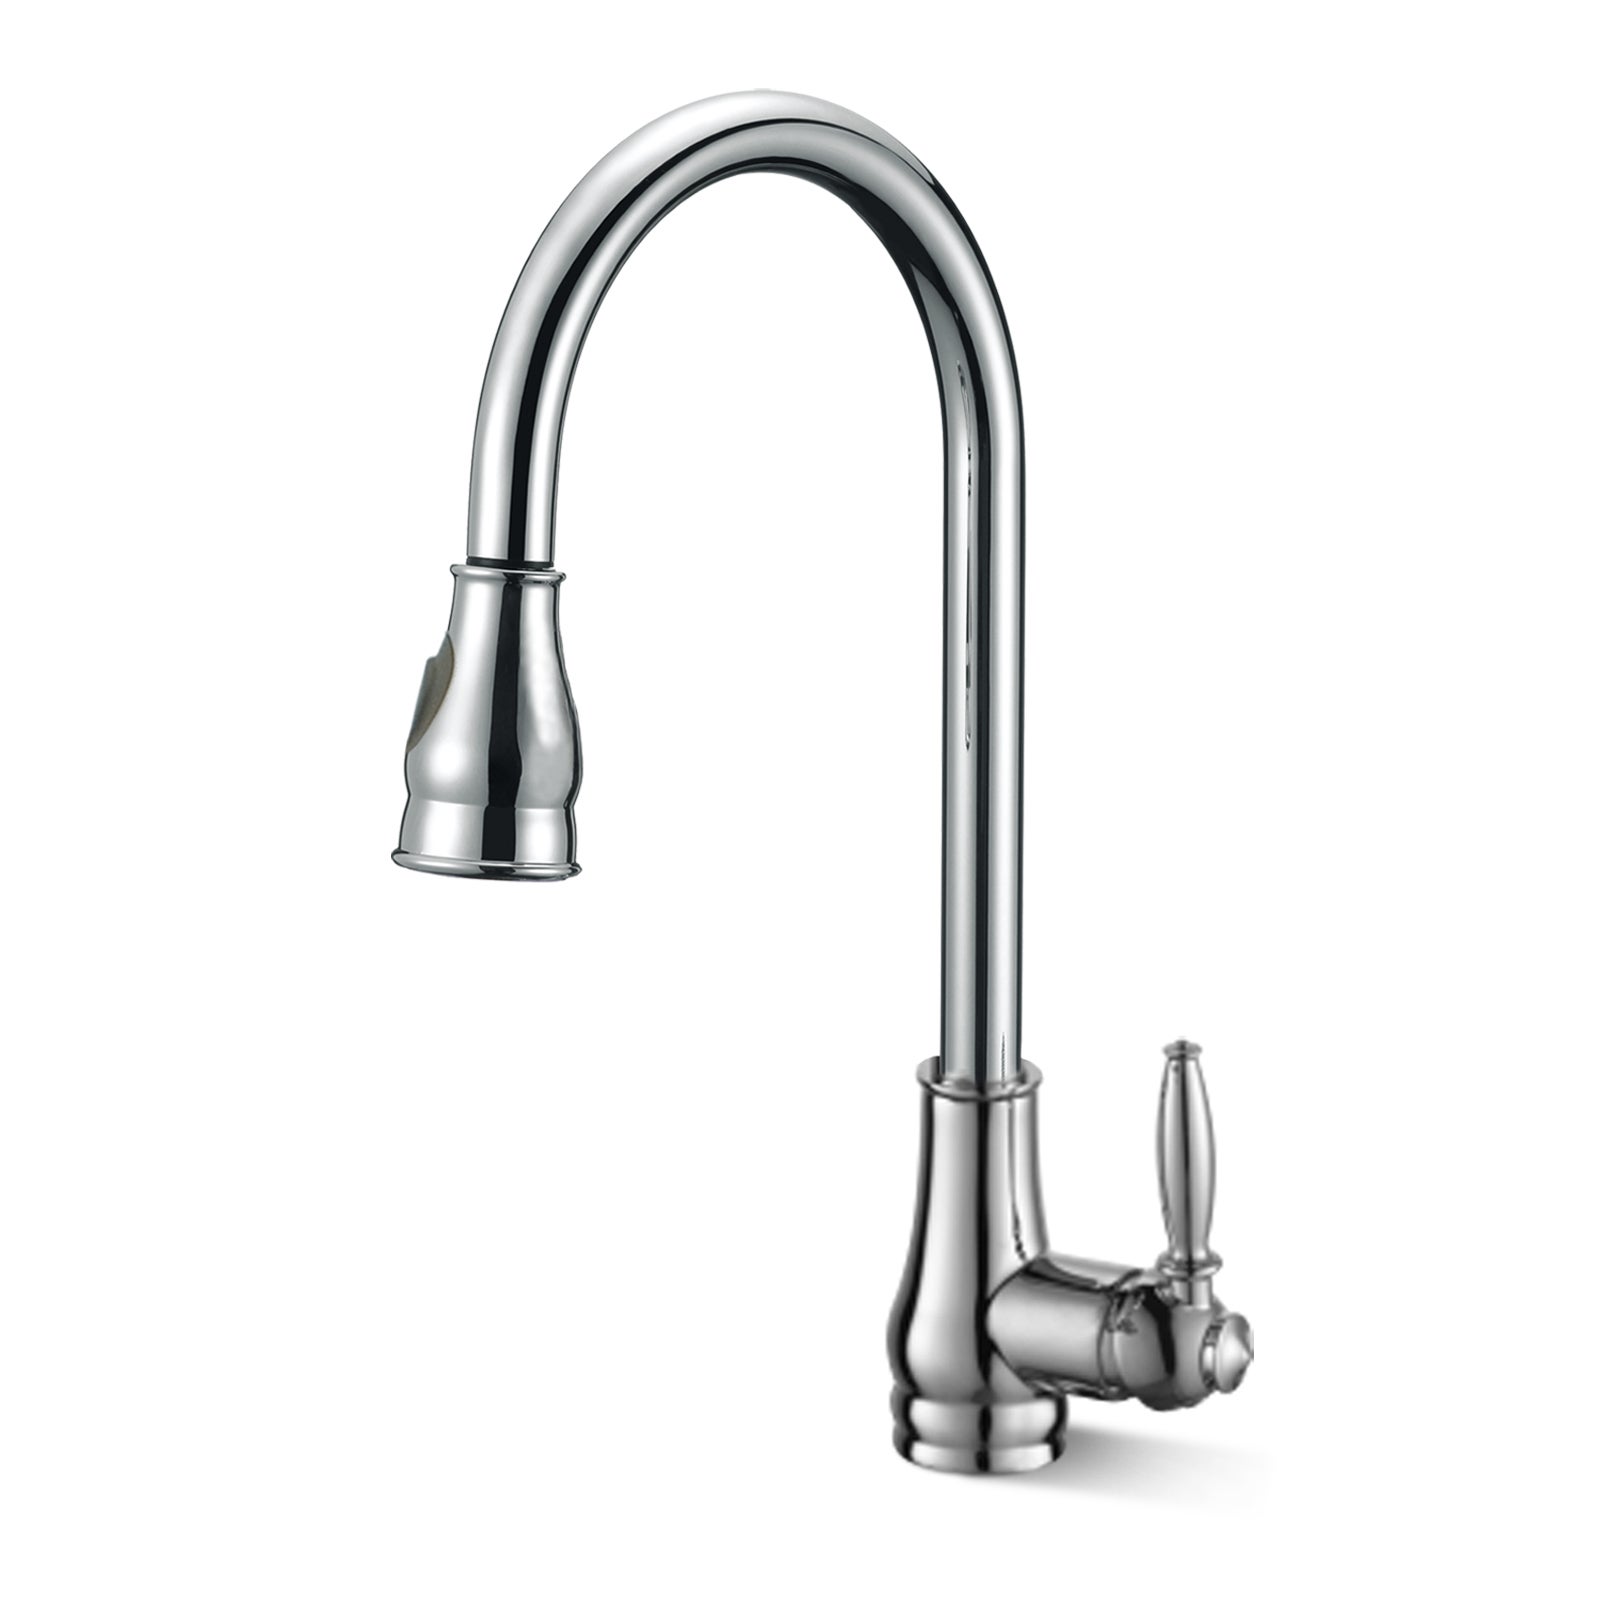 ACA Chrome Kitchen Taps Pull Out Mixer Tap Sink Basin Faucet 360 Degree Swivel Spout Watermark WELS